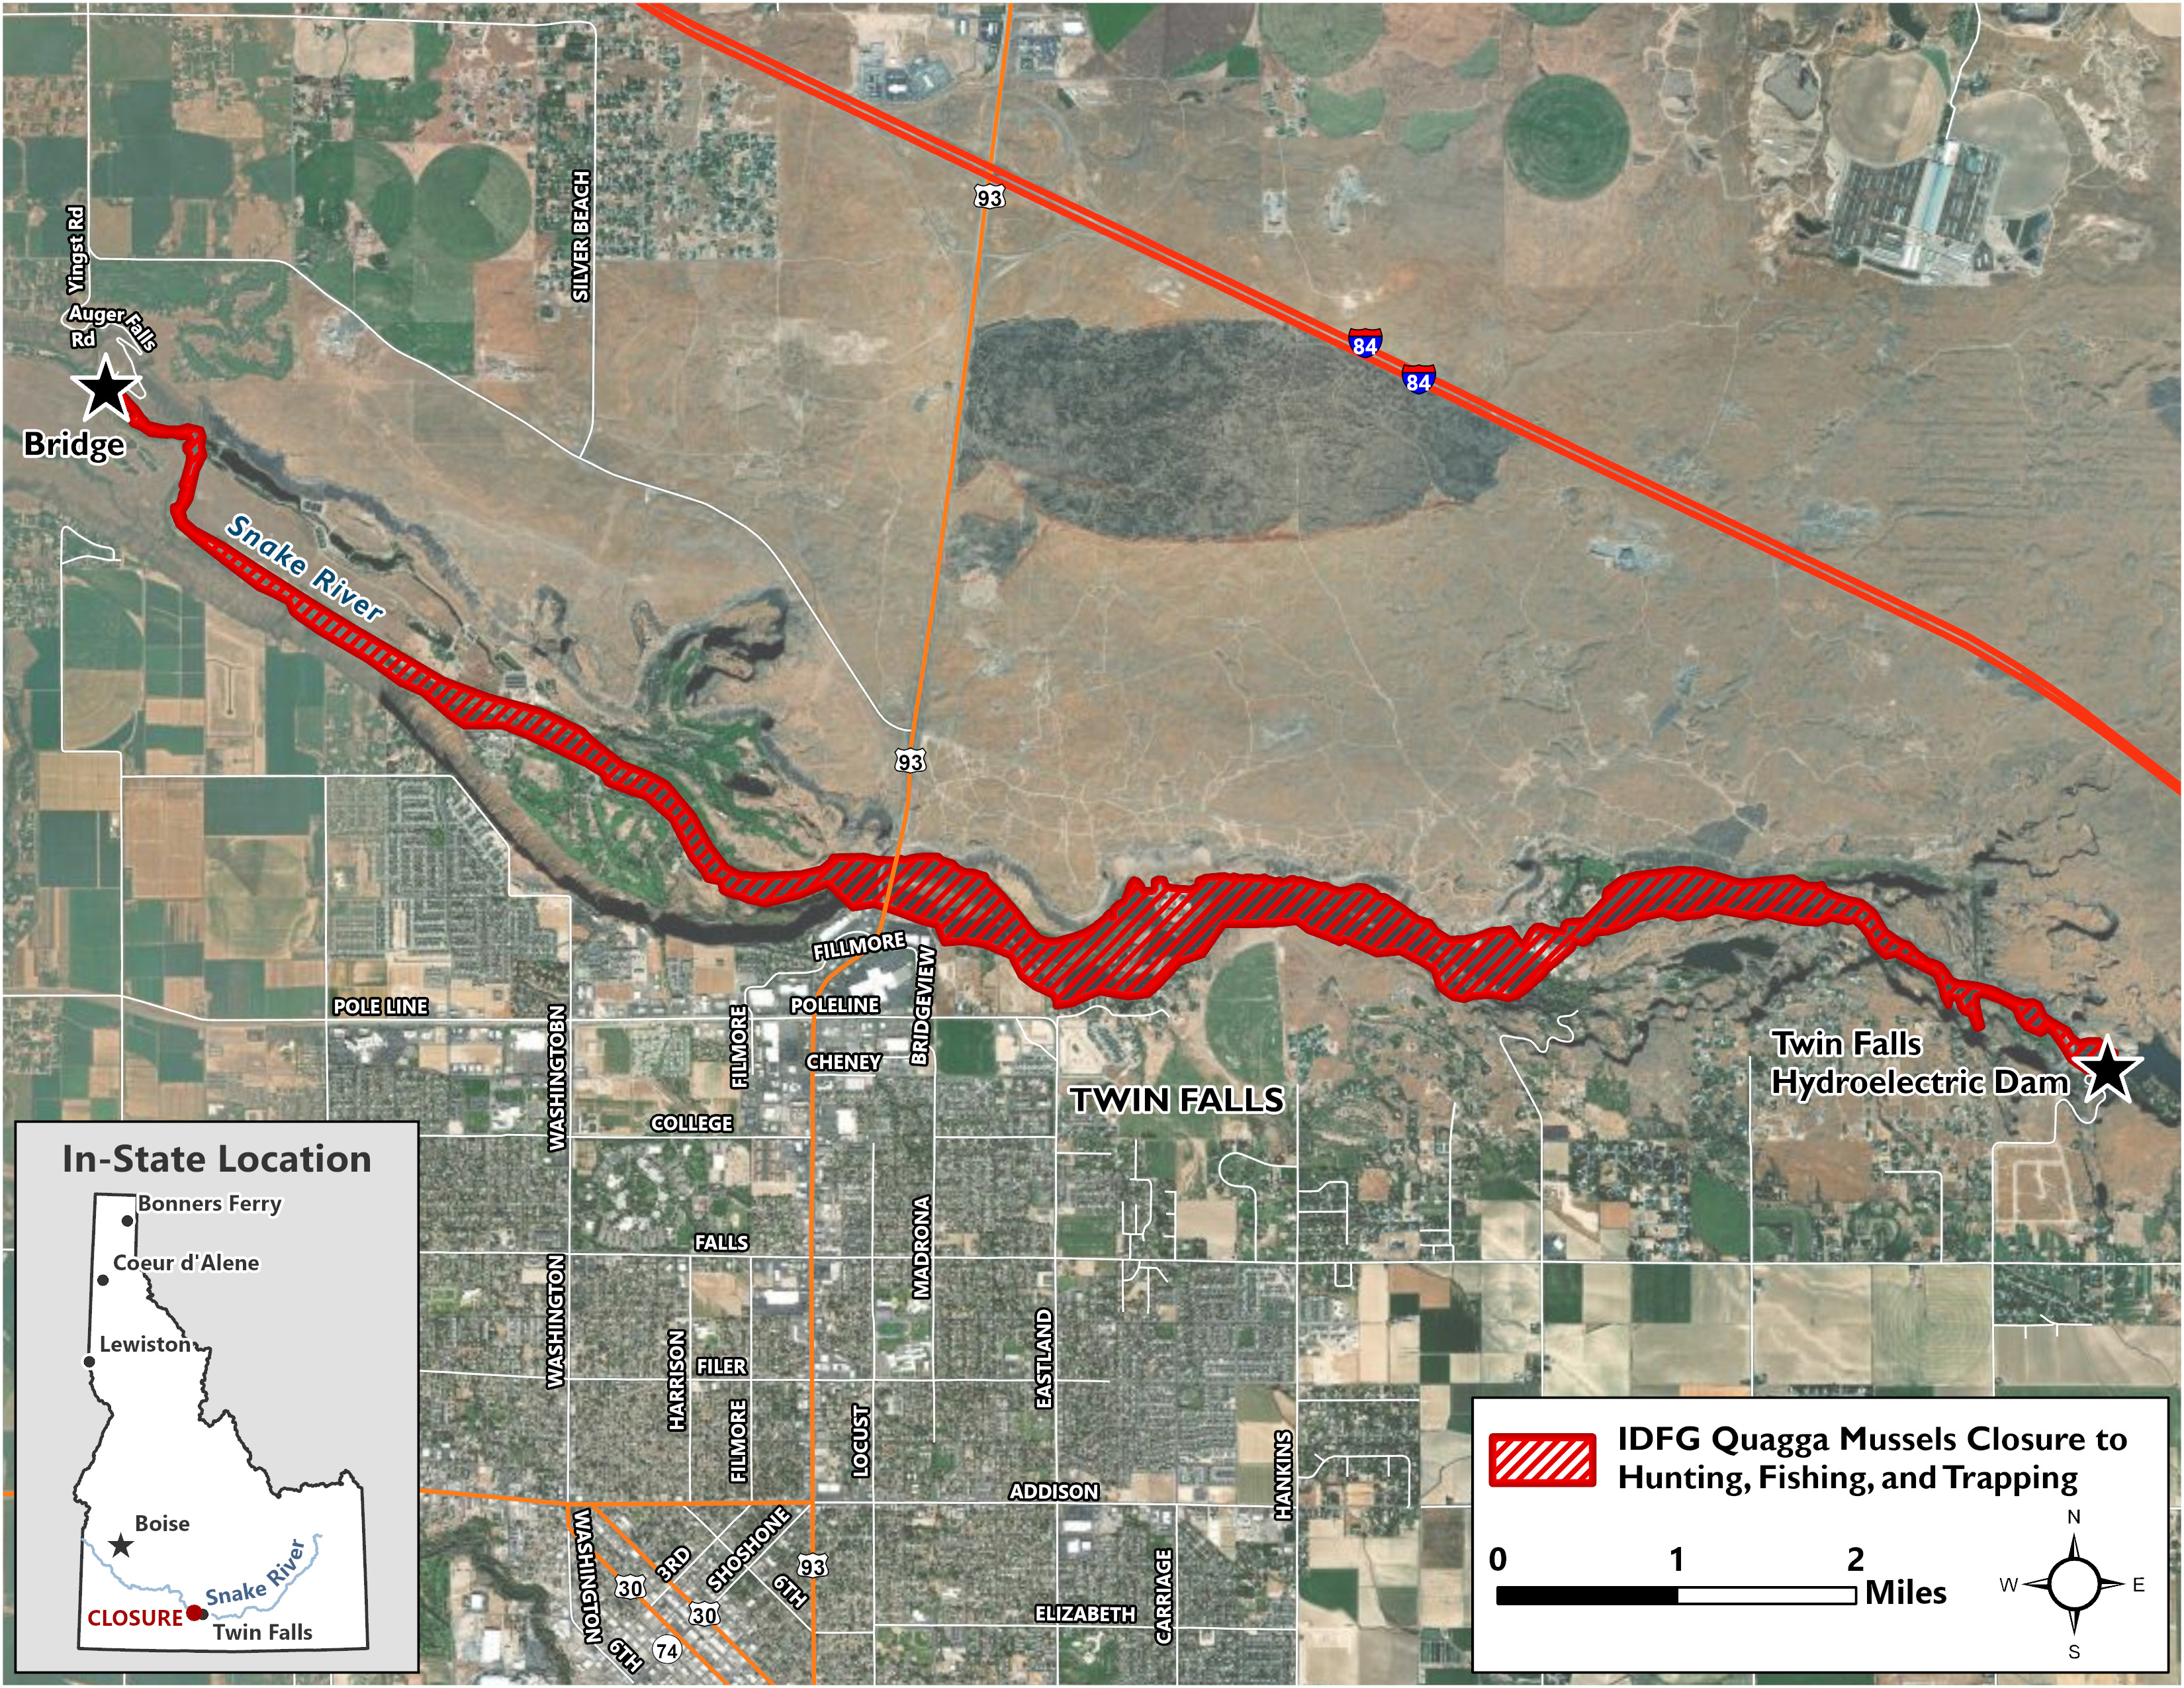 Map of closure area on the mid-Snake River